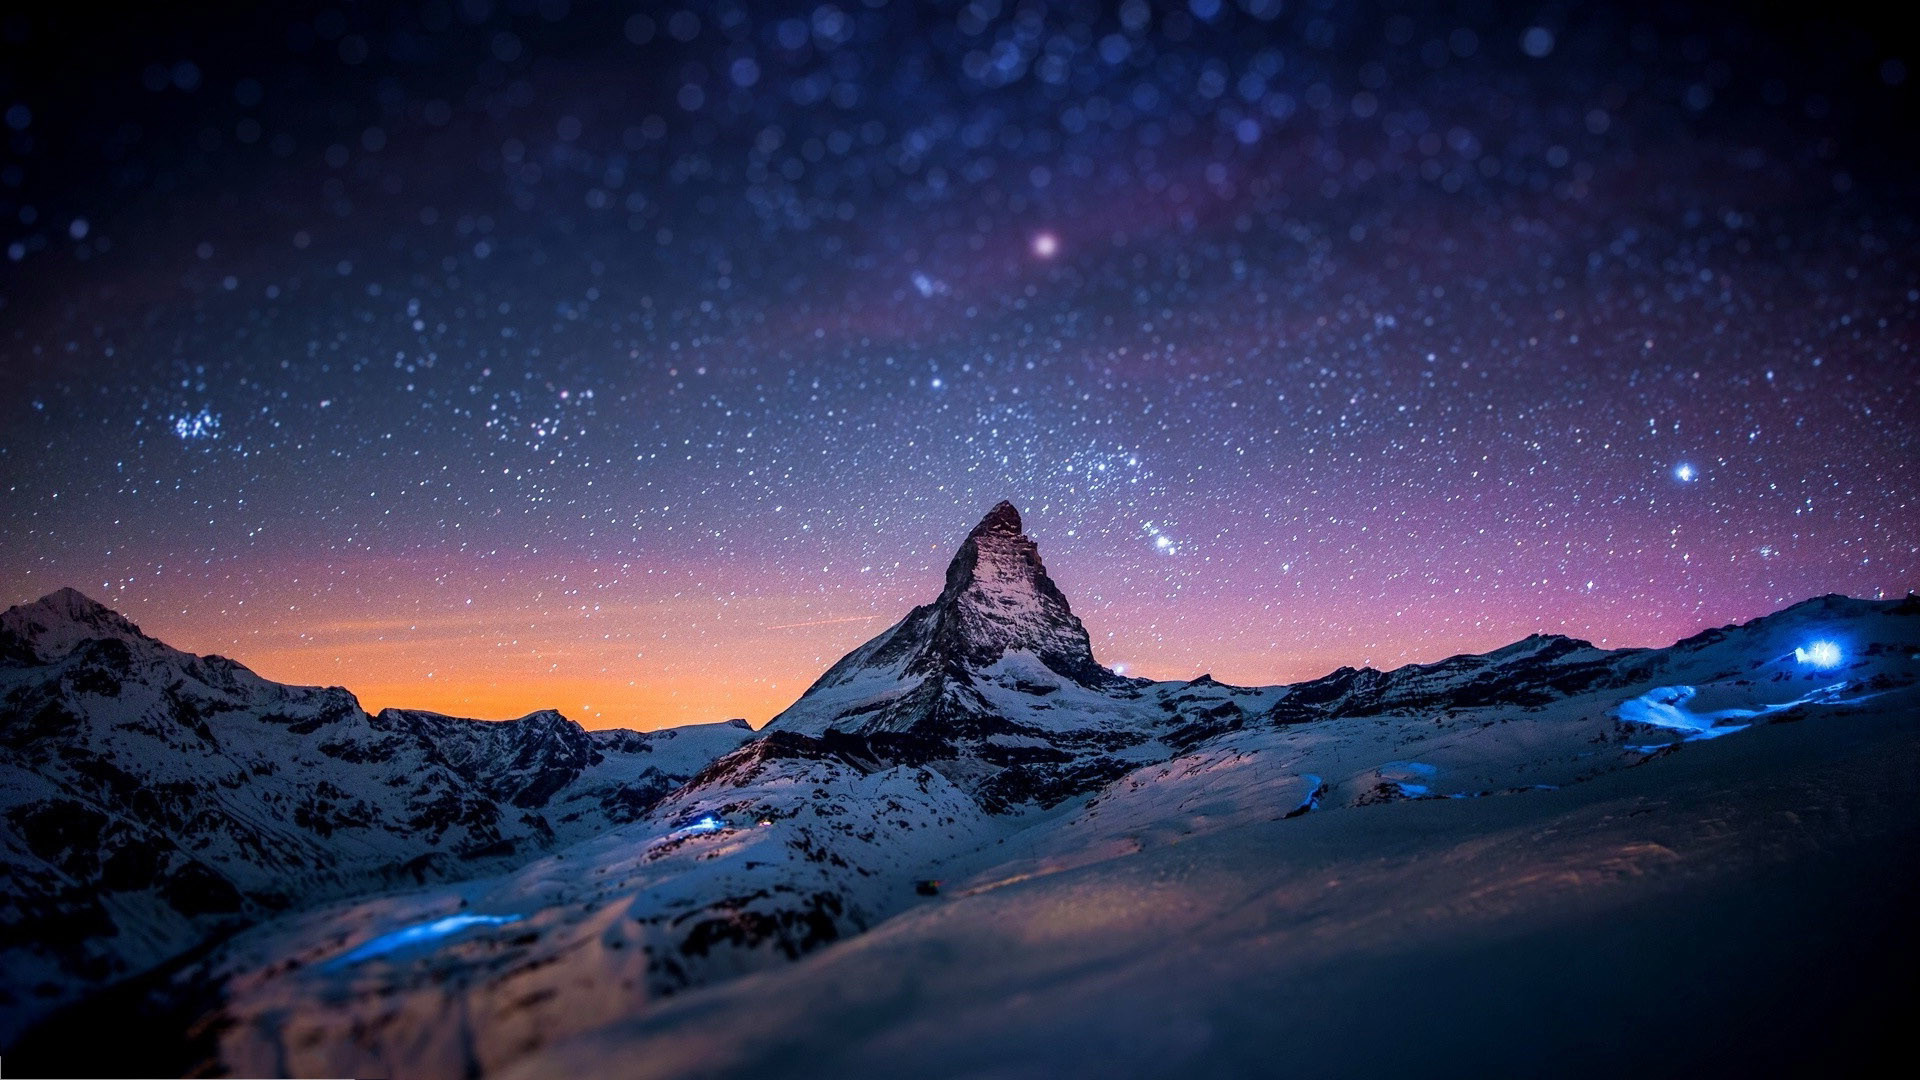 Mountain Night Wallpaper 64 Images Peaceful Hd Practical 9 20260